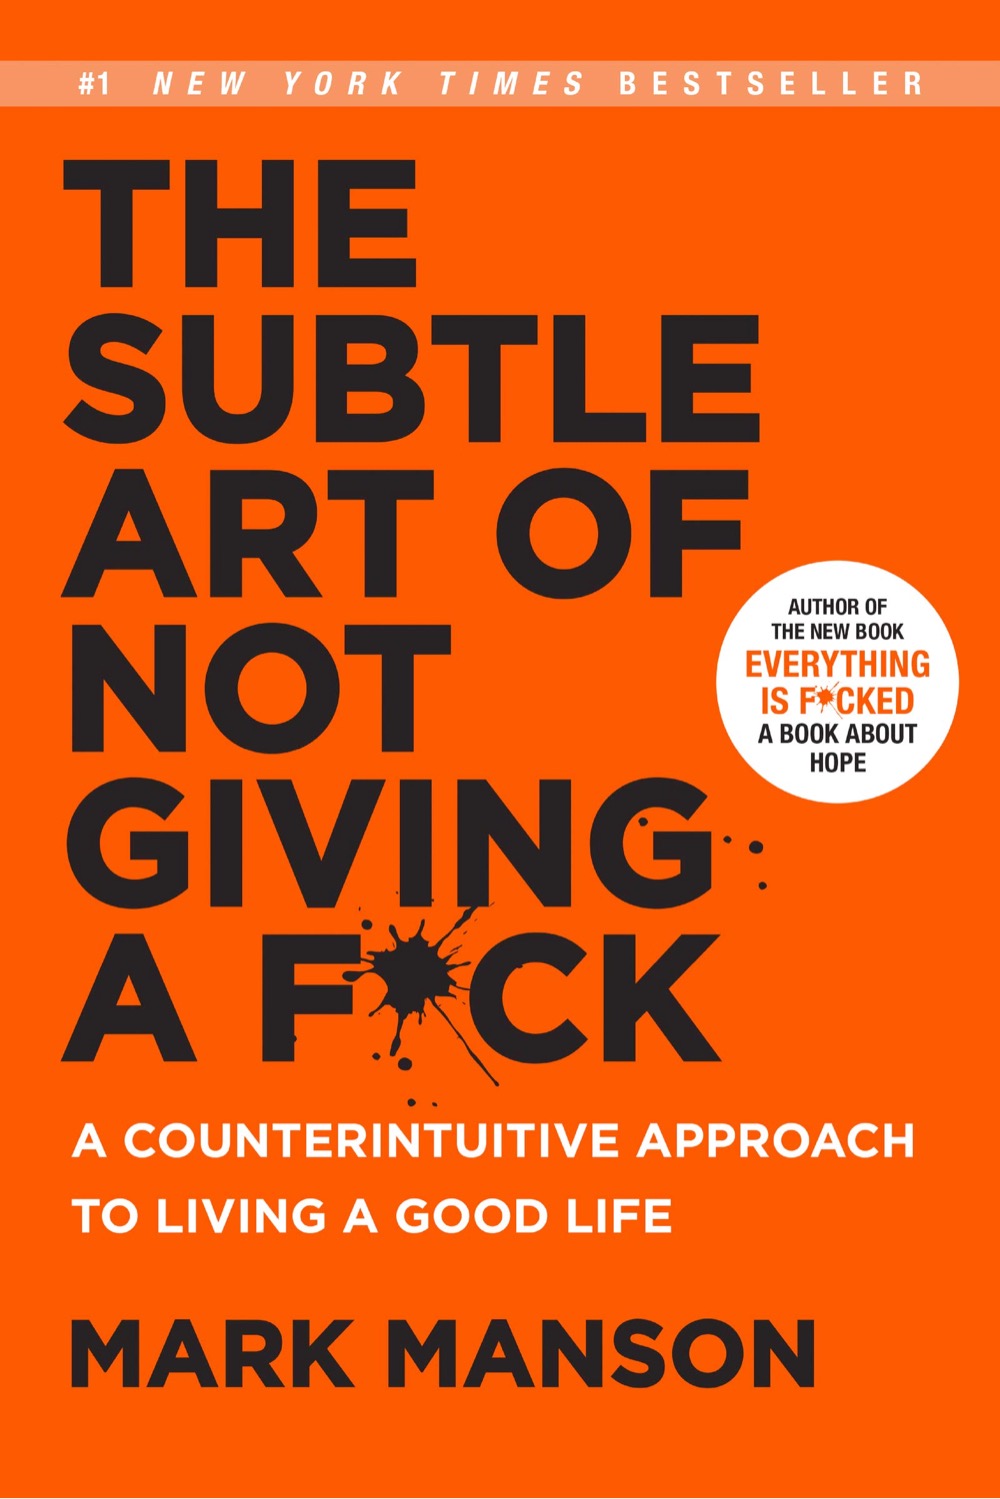 book cover with the word 'f*ck' in the title